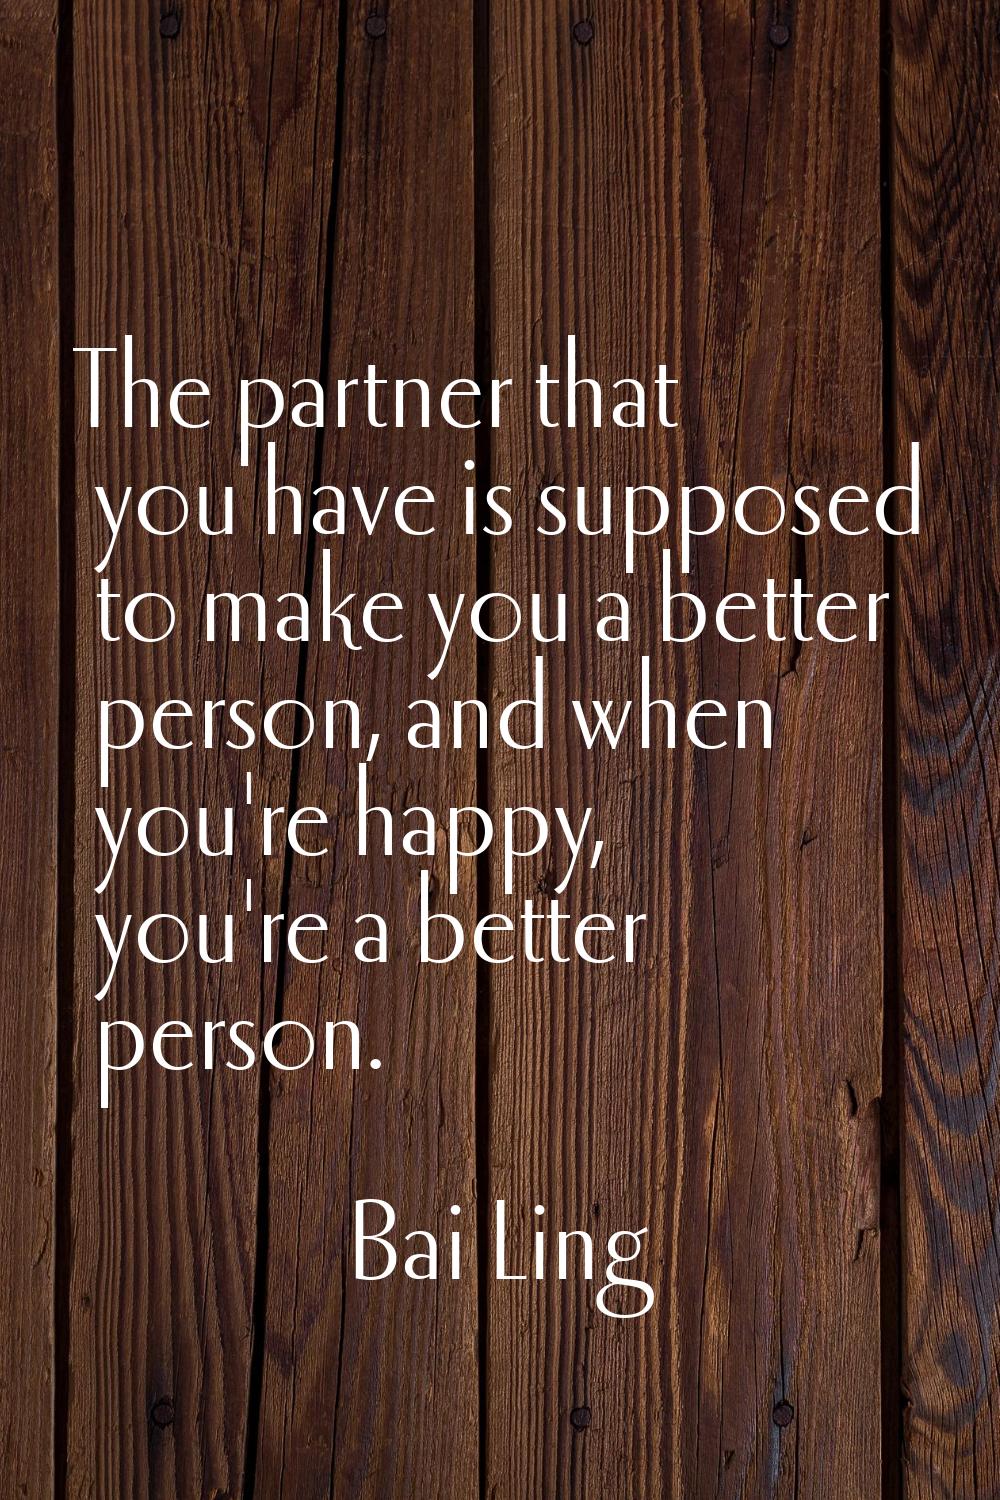 The partner that you have is supposed to make you a better person, and when you're happy, you're a 